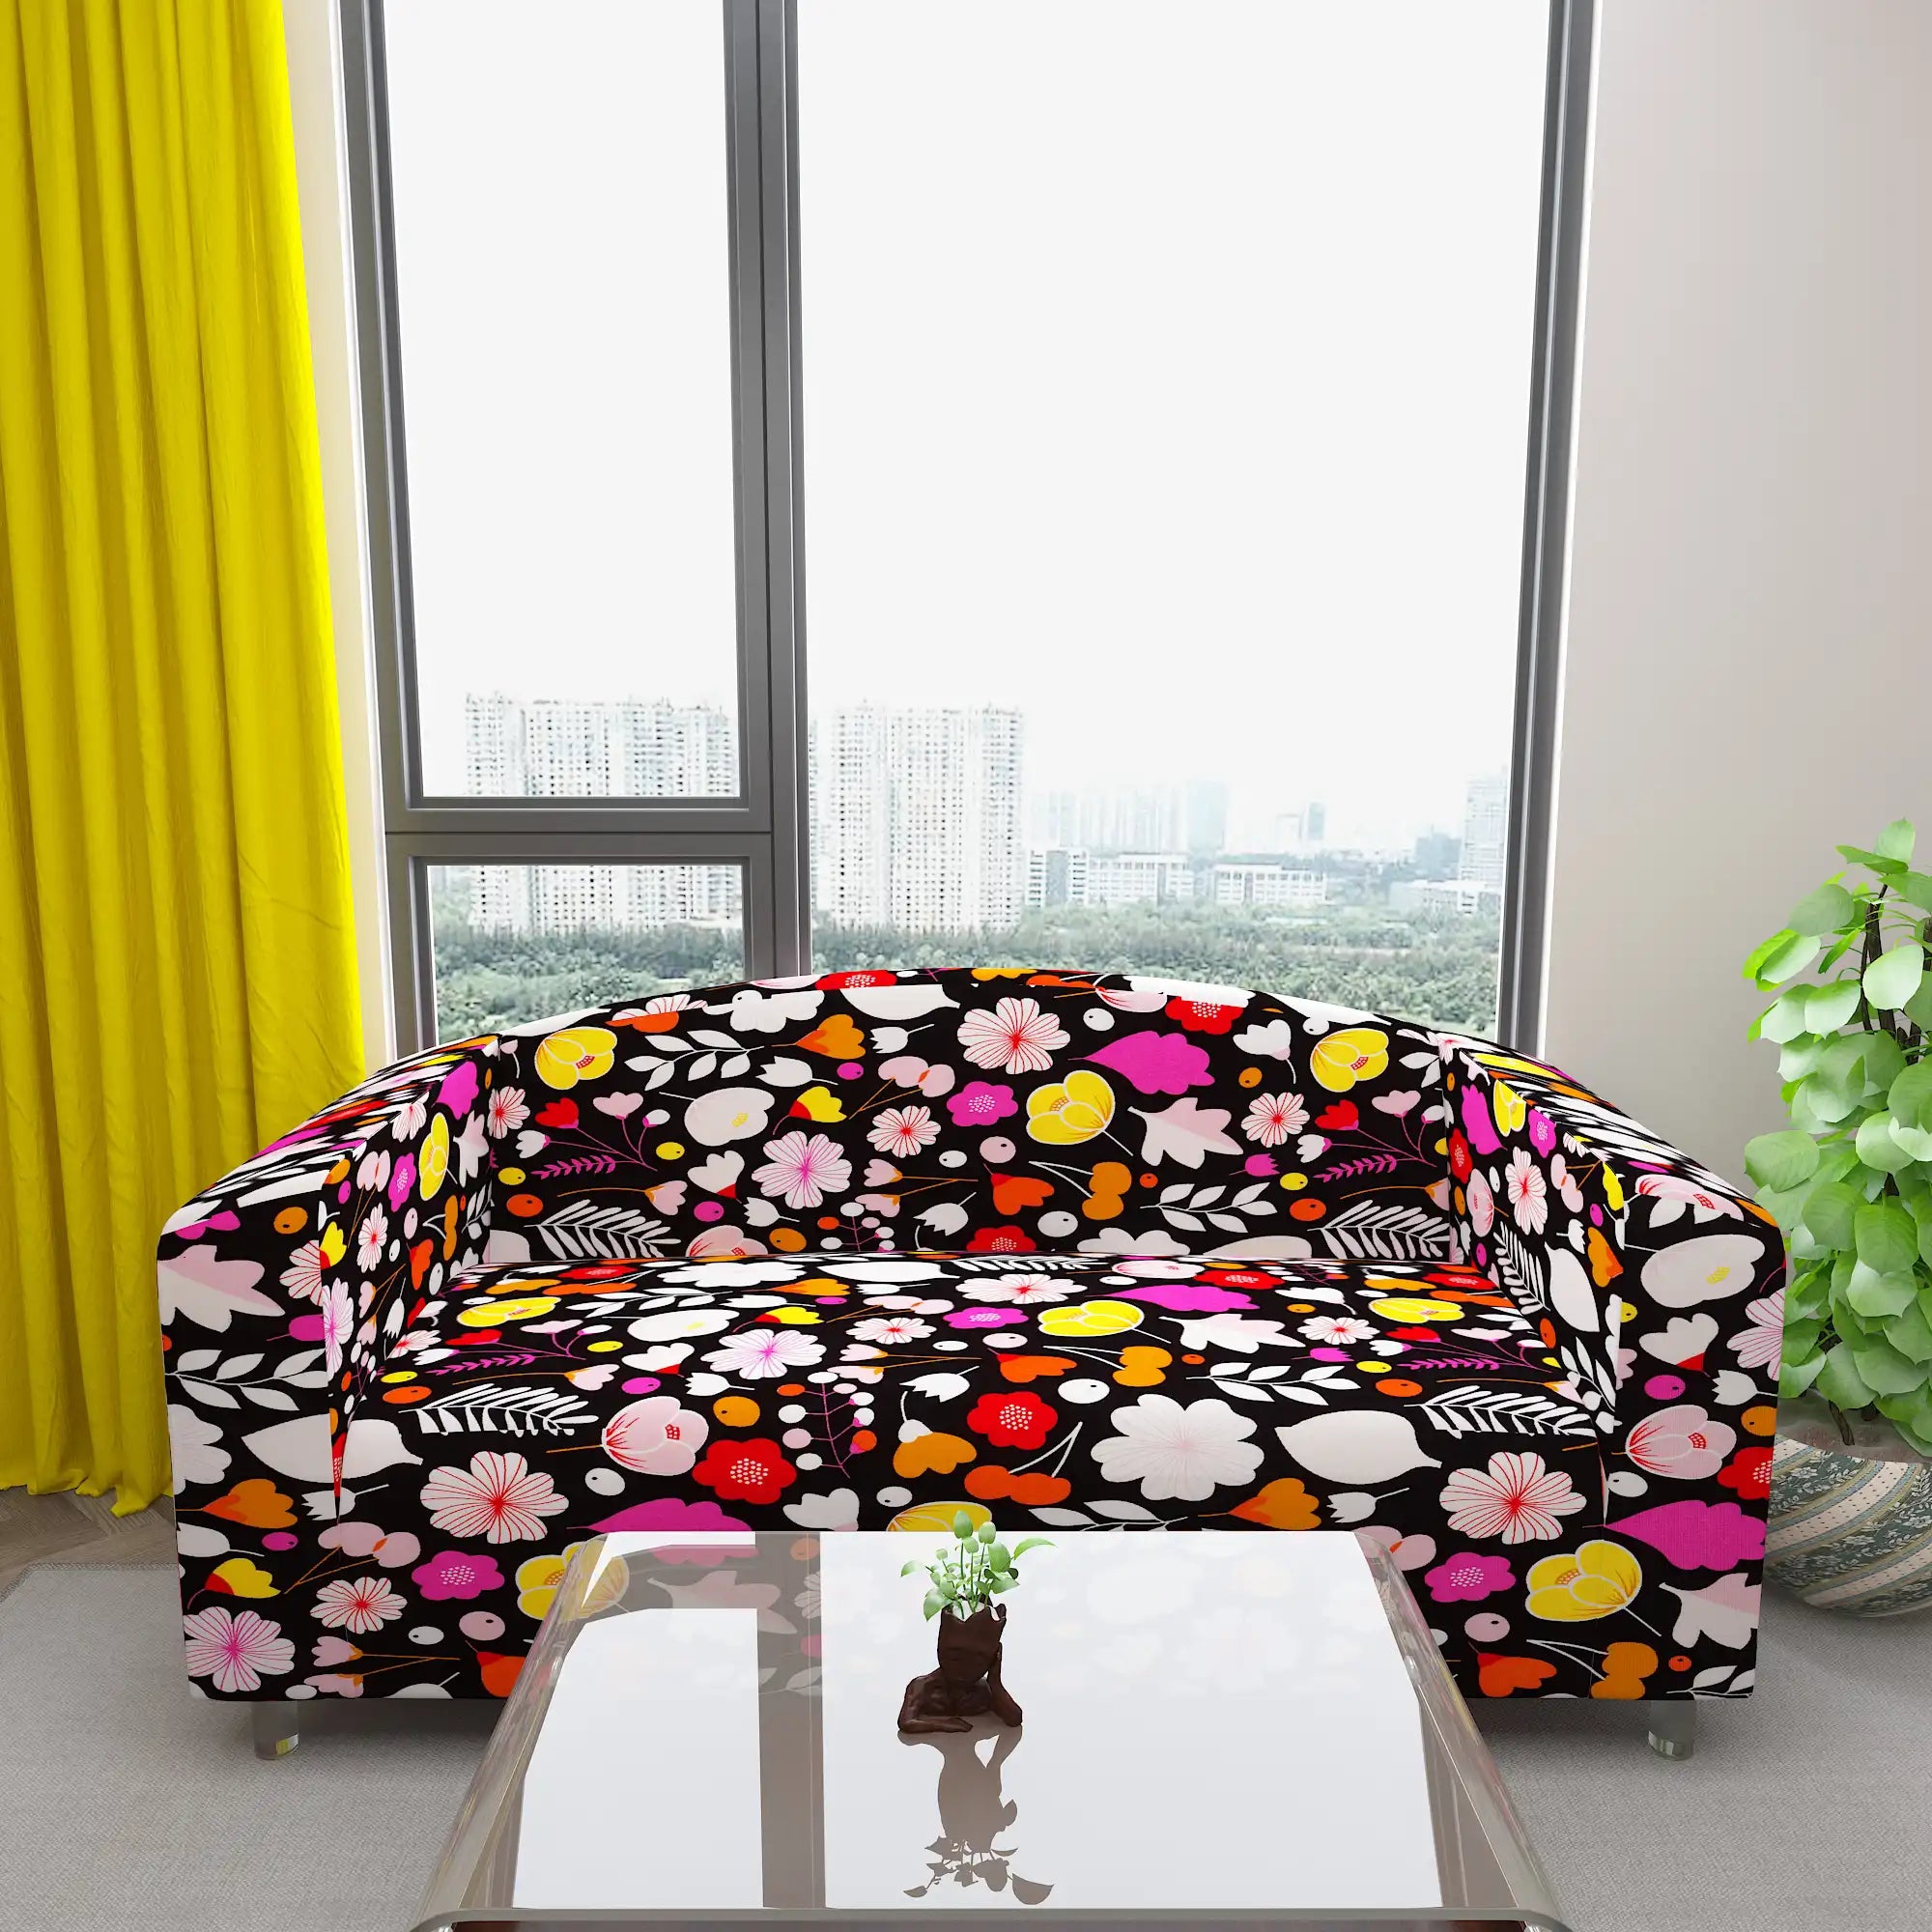 Waterproof Printed Sofa Protector Cover Full Stretchable, SP04